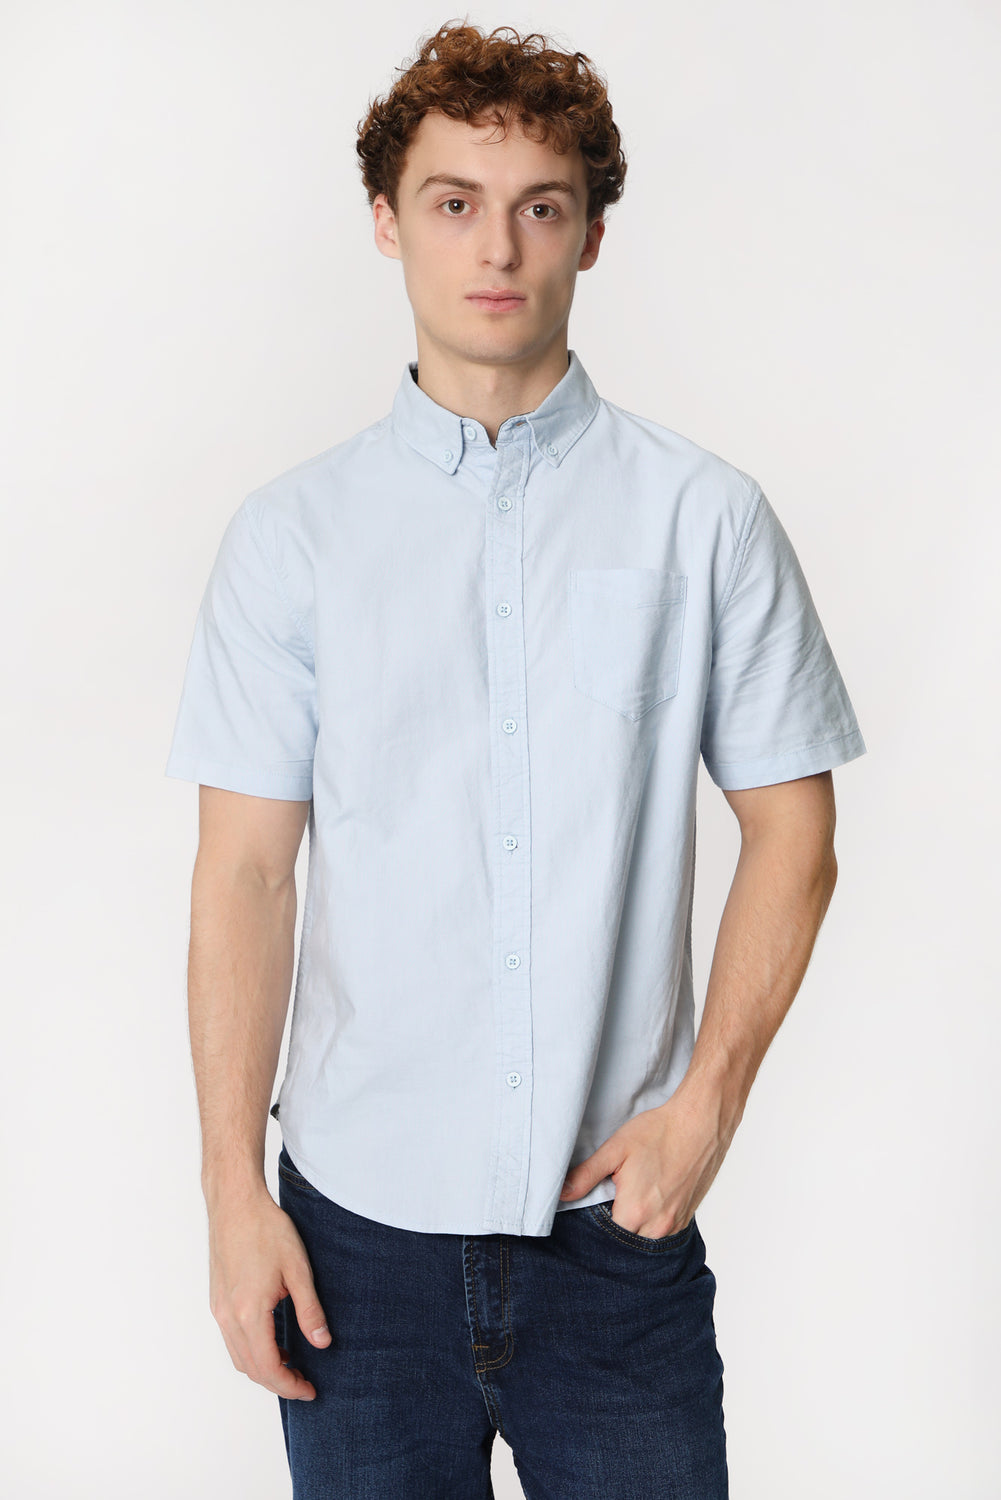 Chemise Oxford West49 Homme Chemise Oxford West49 Homme